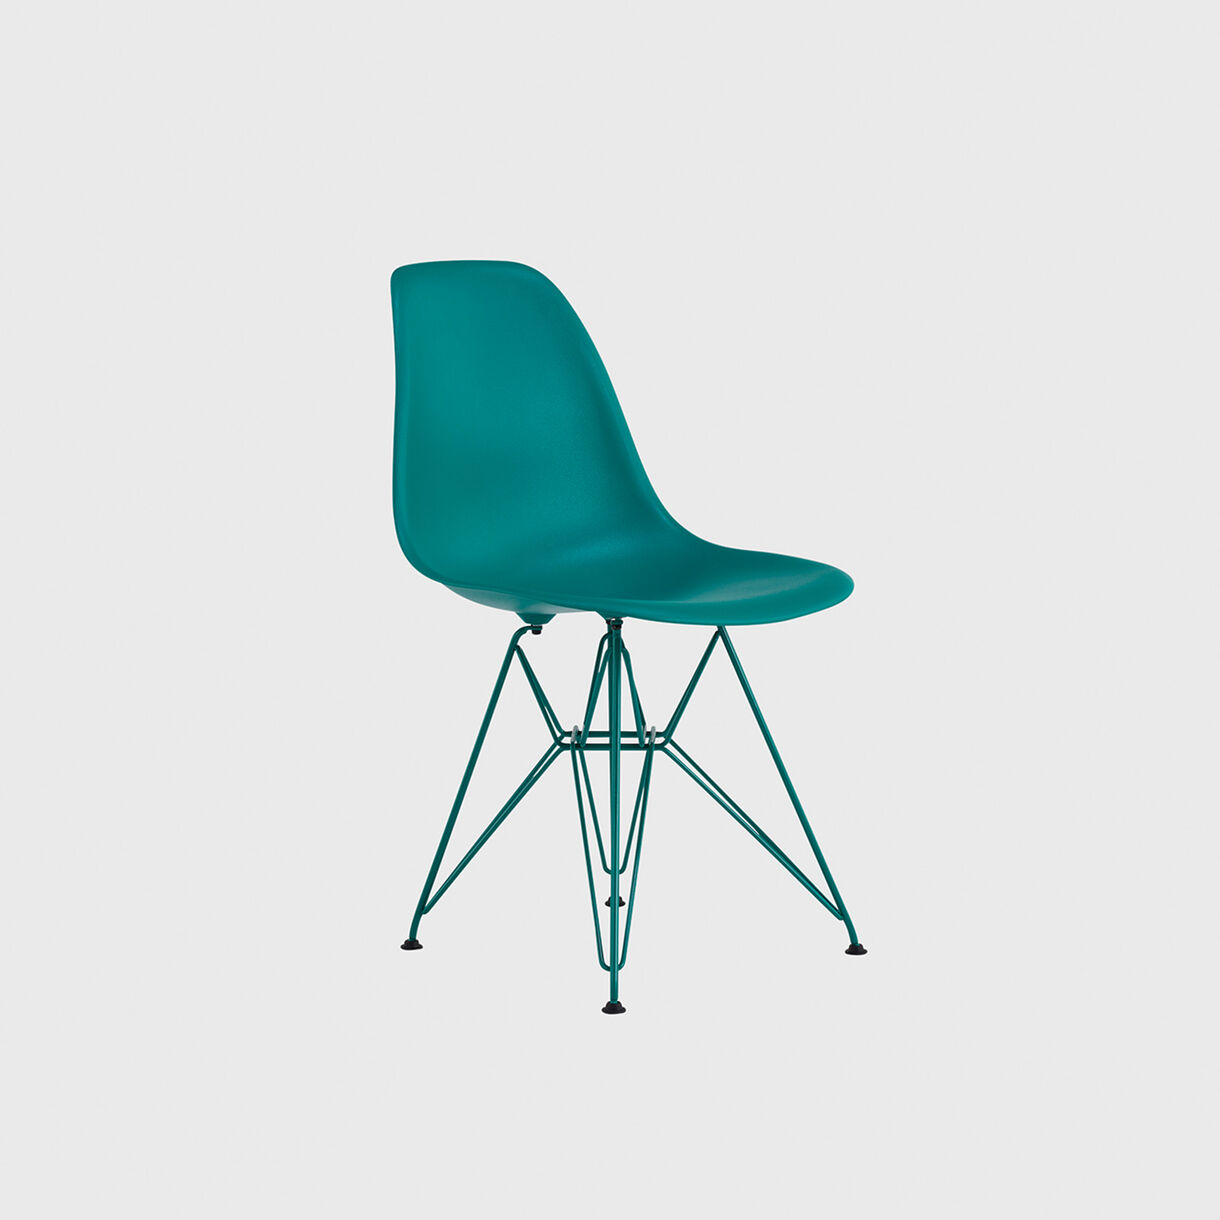 HM x Hay Eames Moulded Plastic Side Chair, Wire Base, Mint Green